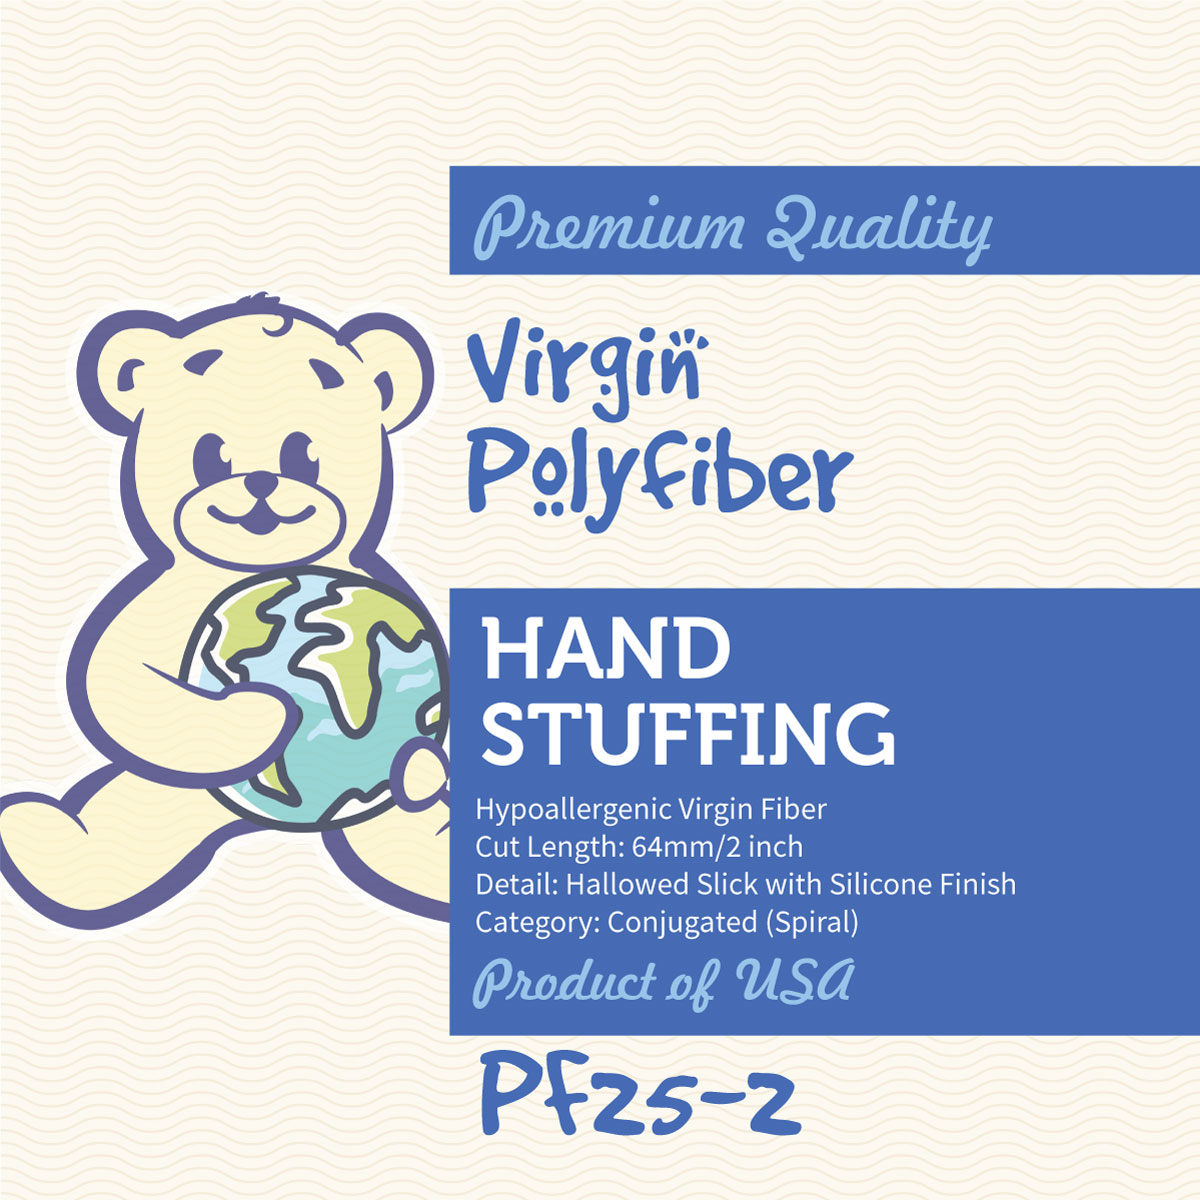 Polyfiber 2 inch (1 box) 25 lb. (For Hand Stuffing Only) - The